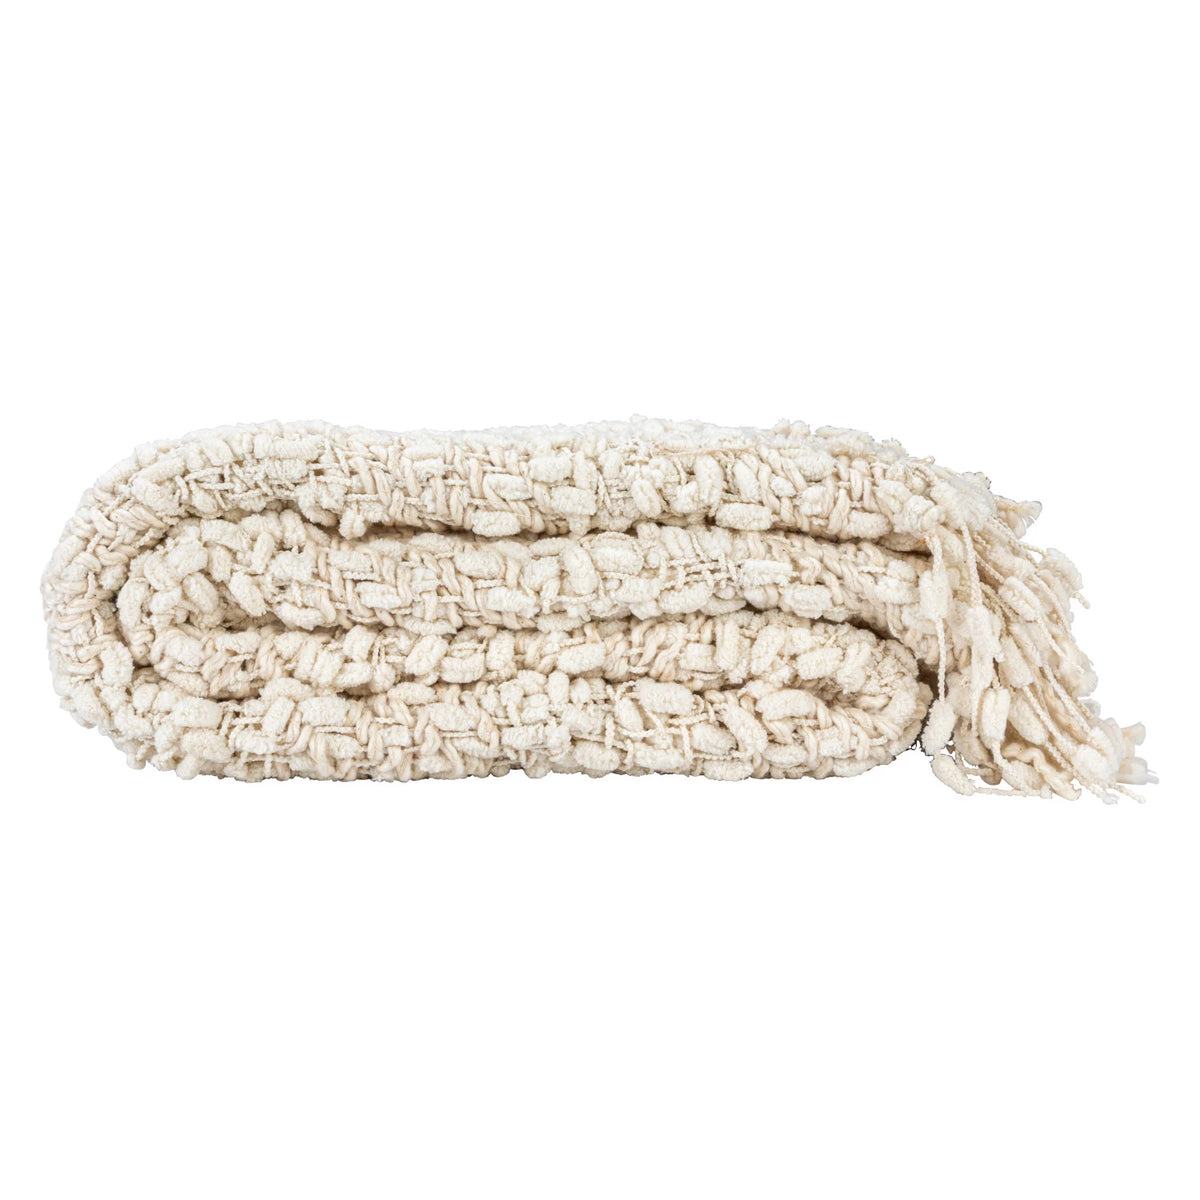 Woven Cotton Blend Cable Knit Throw Blanket w/ Fringe